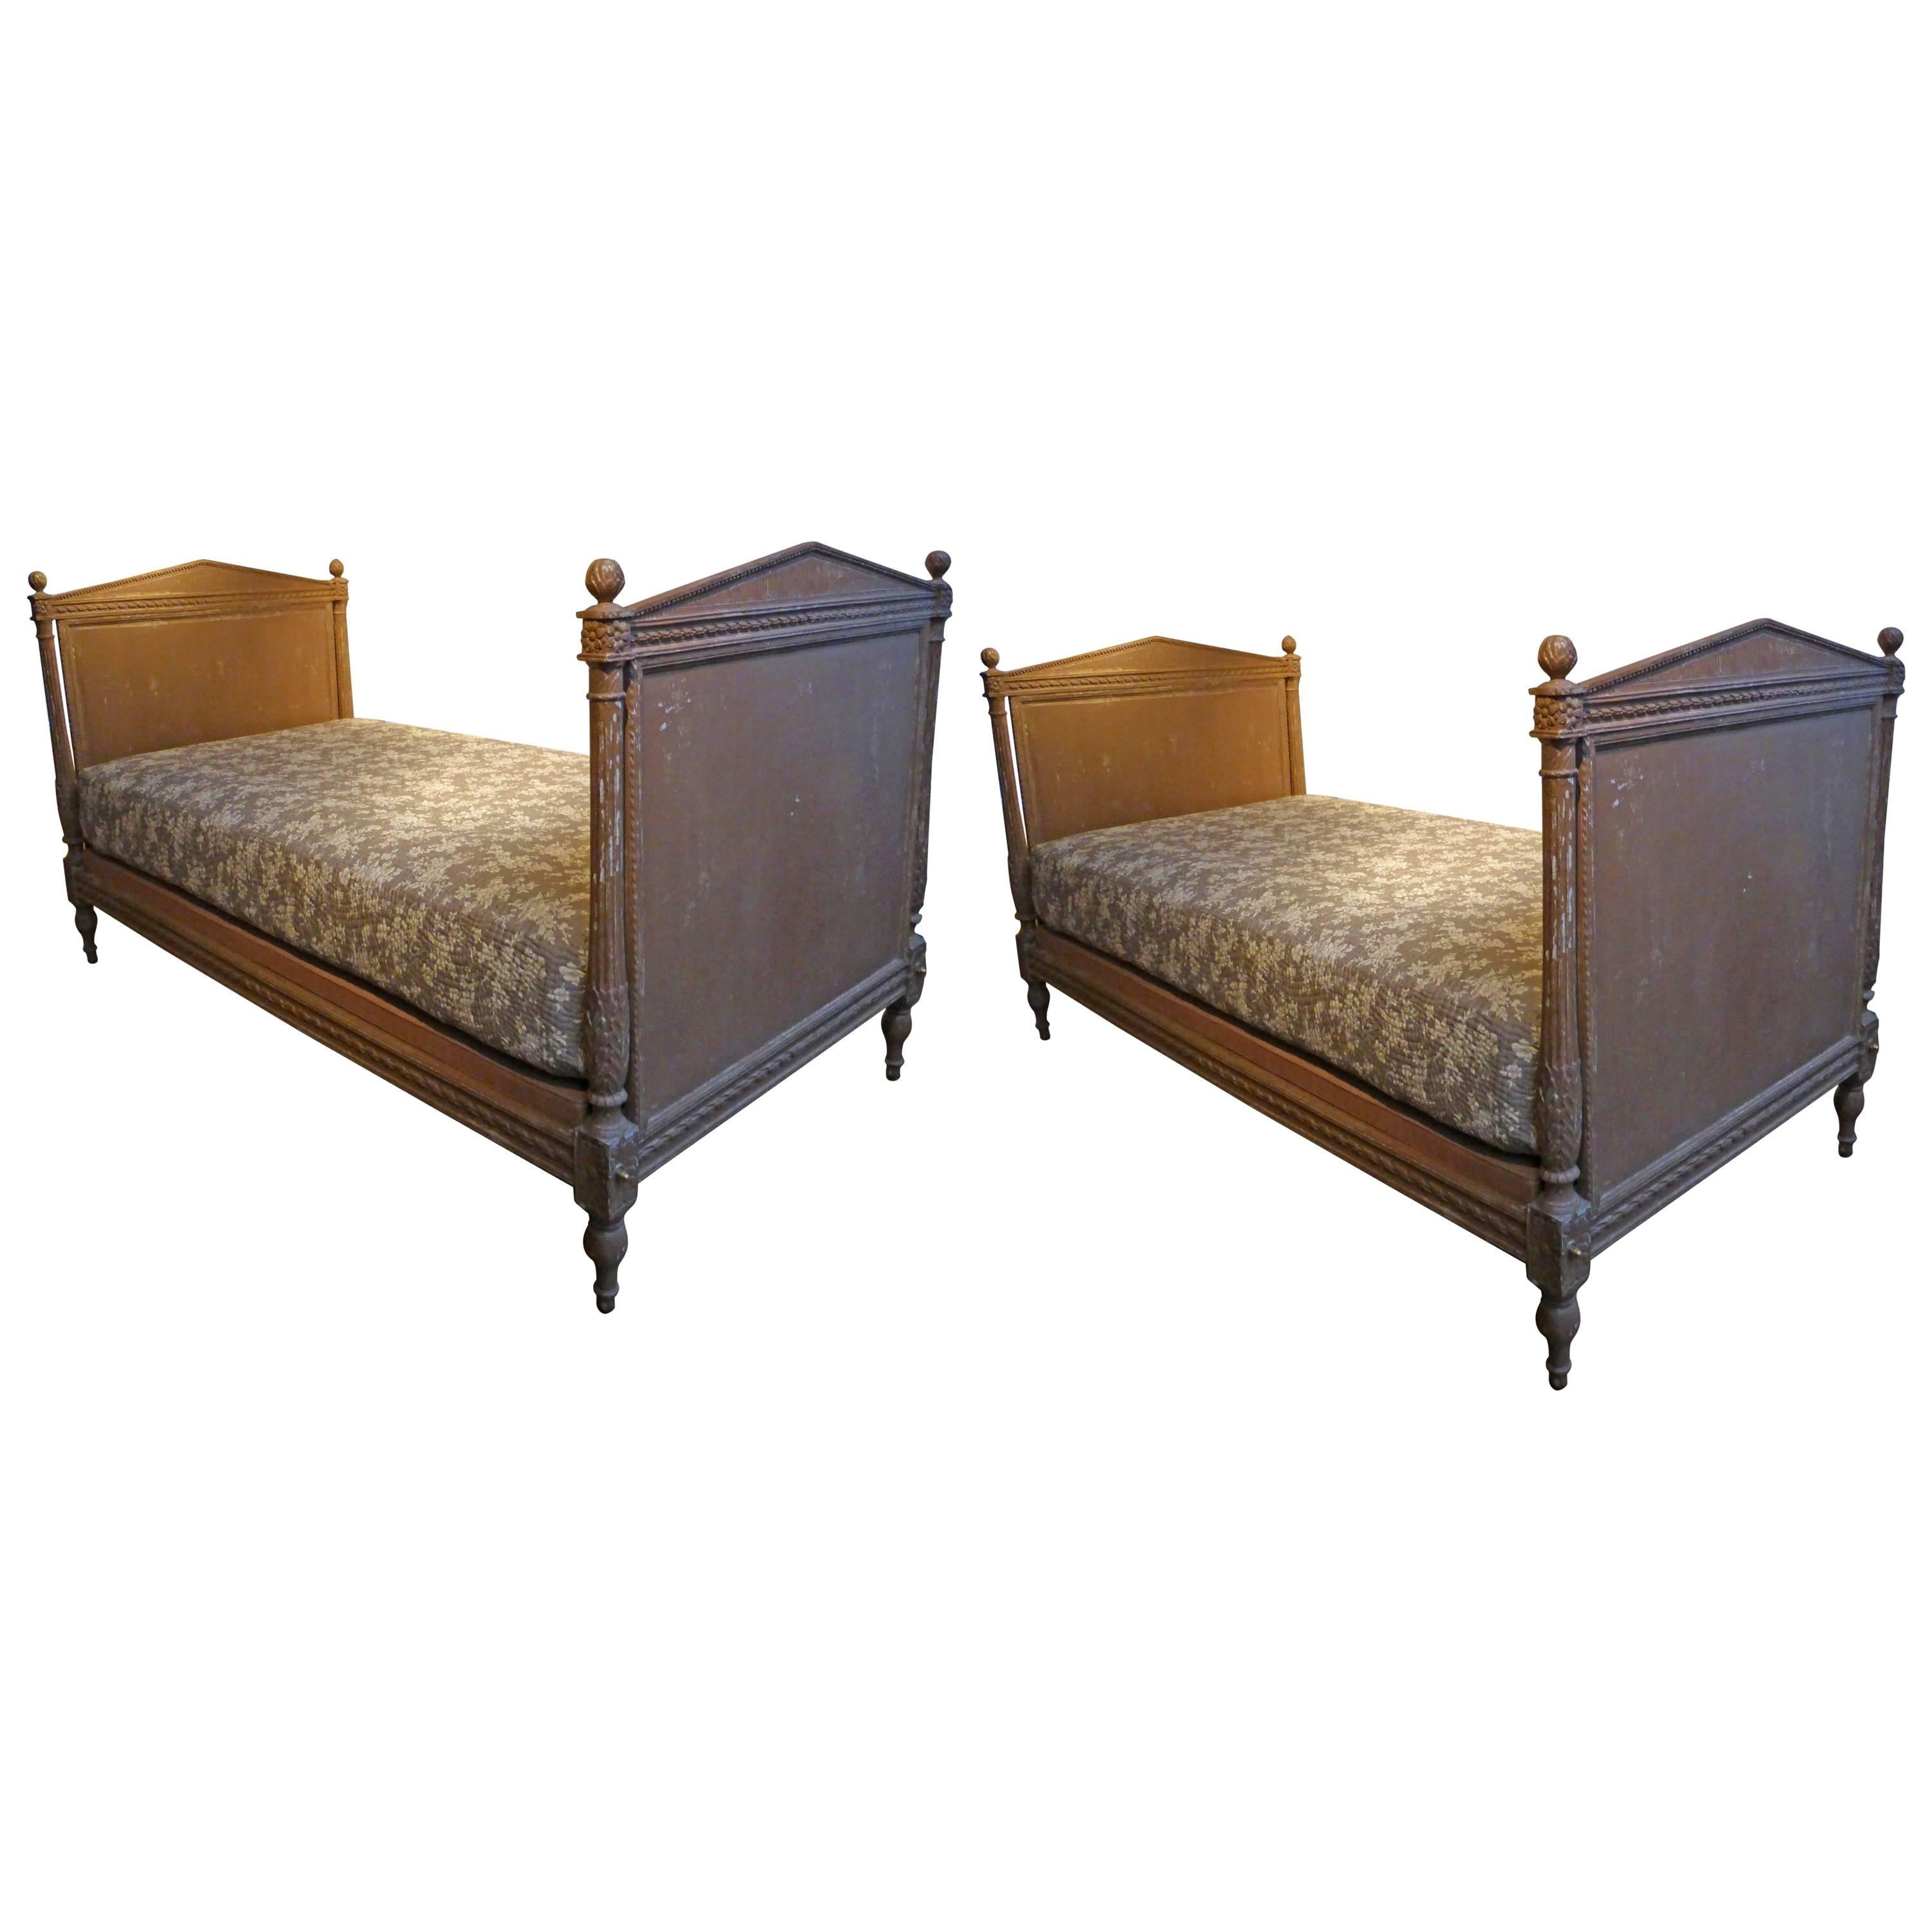 Pair of Directoire Beds